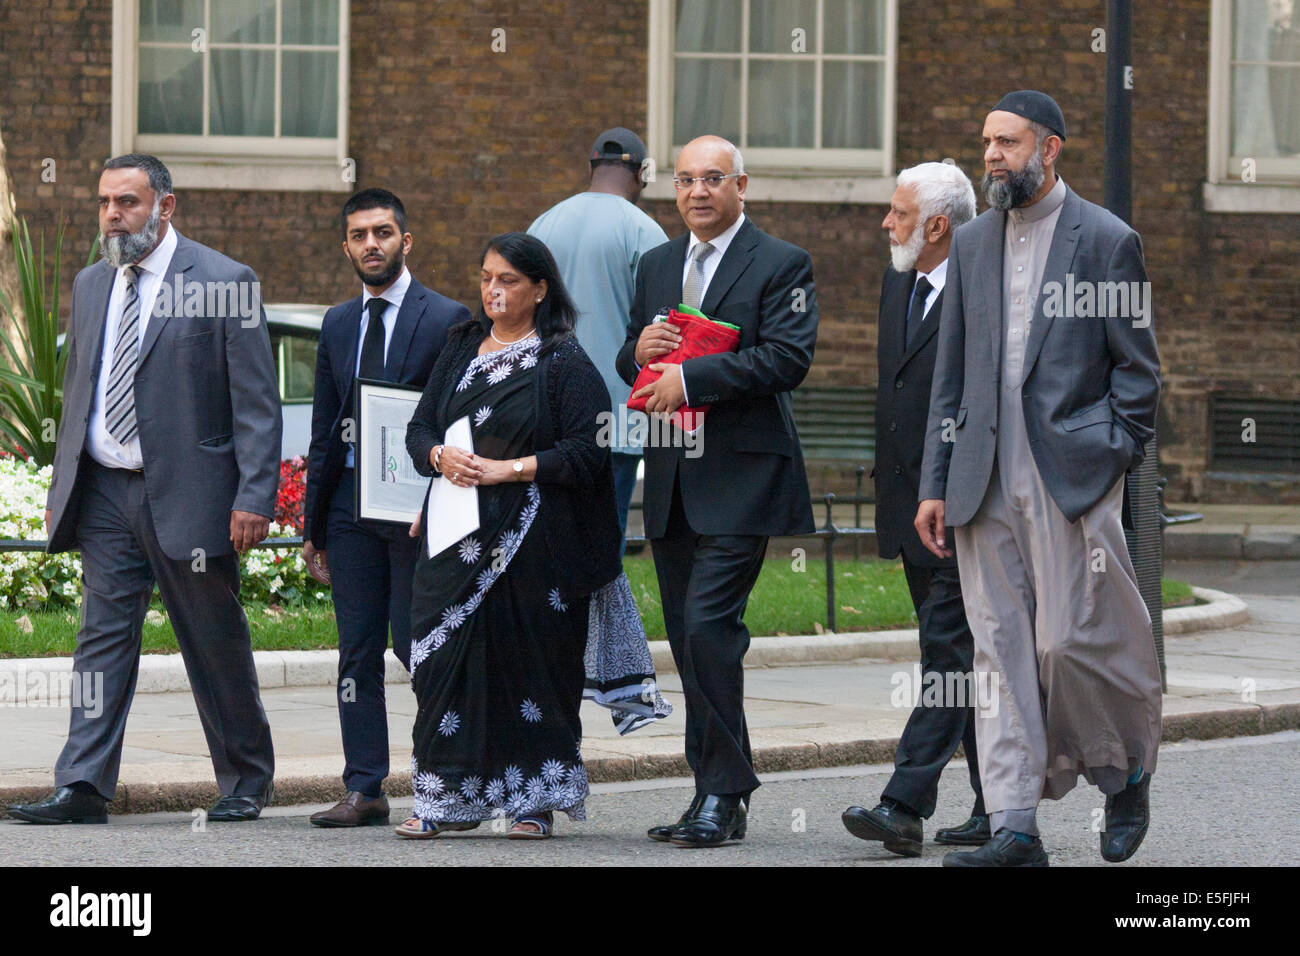 London, UK. 30th July, 2014. . Representatives from the Federation of Muslim Organisations from Leicestershire accompanied by Keith Vaz MP, Leicester East, deliver a 'Palestinian Peace Flag' signed by hundreds, calling on the Prime Minister to help encourage an immediate ceasefire in the Israeli-Palestinian conflict. Credit:  Paul Davey/Alamy Live News Stock Photo